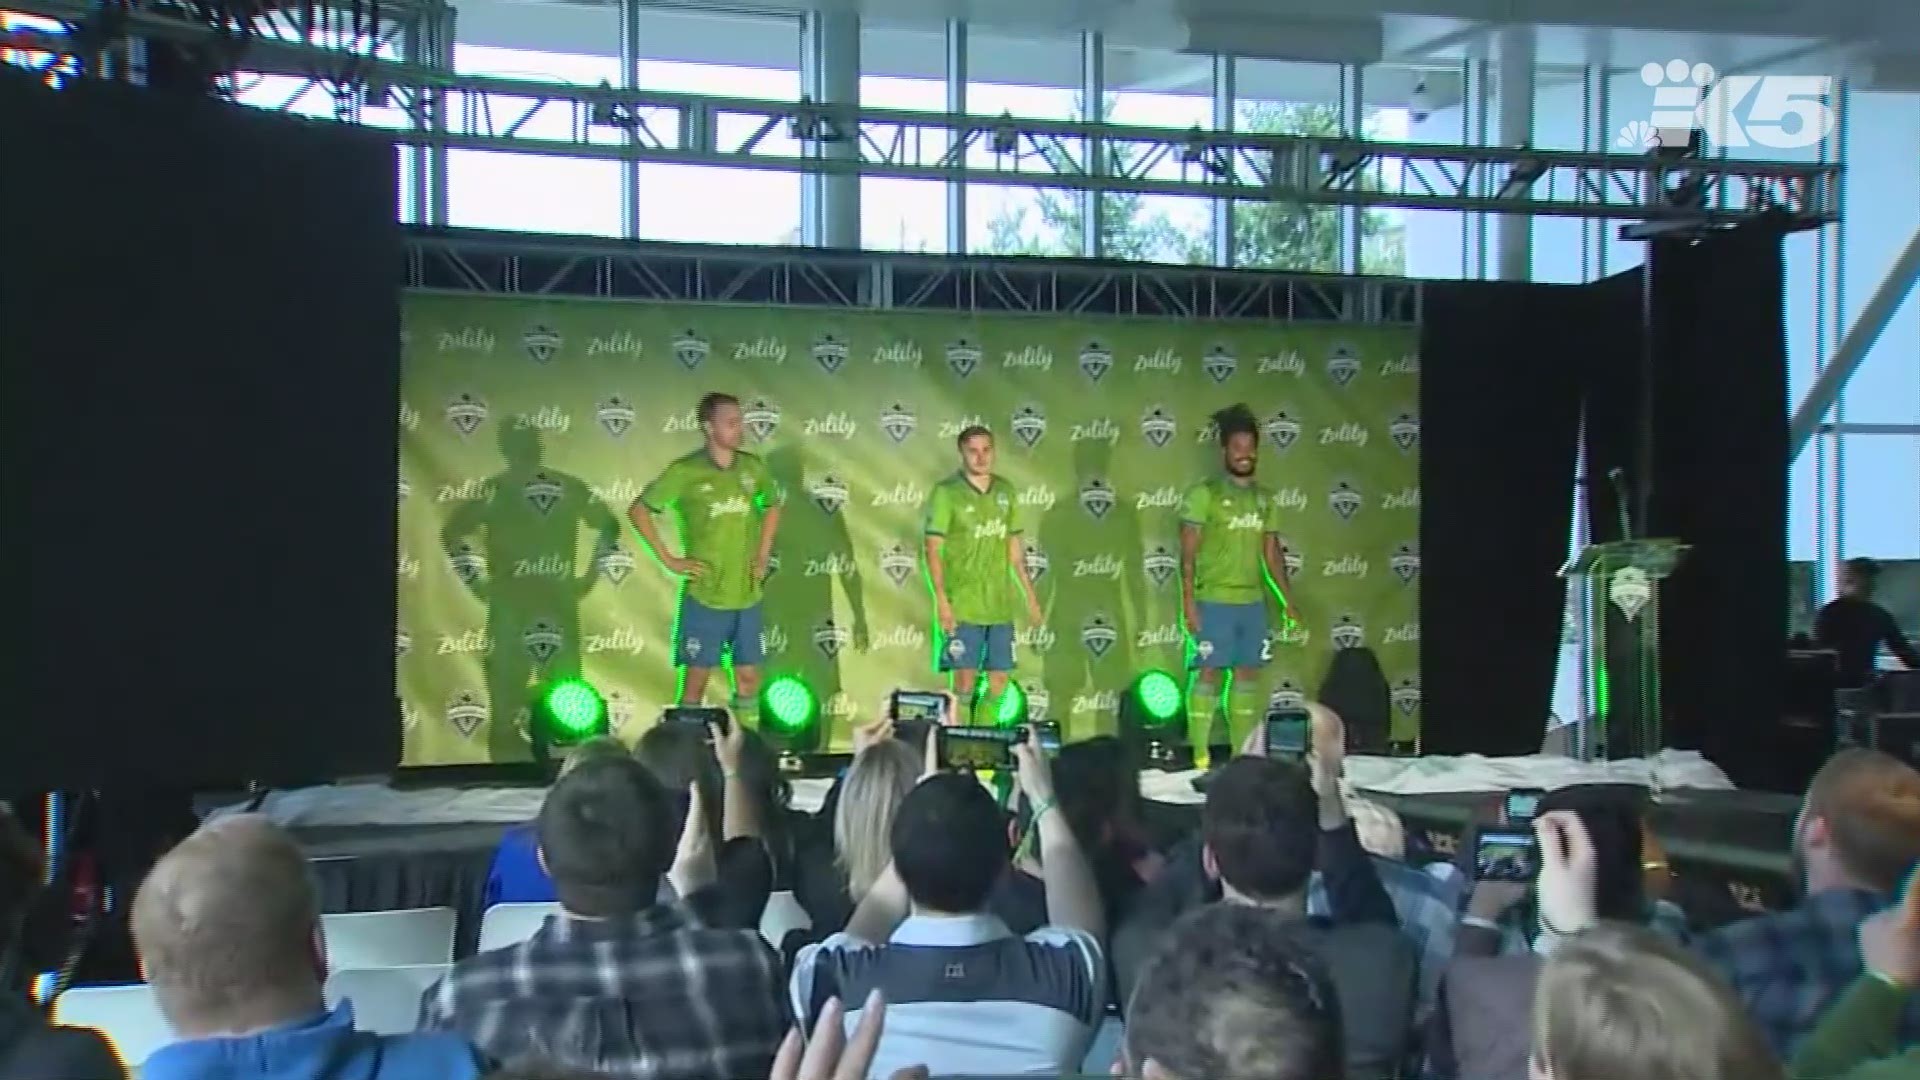 Seattle Sounders FC announced Thursday that online retailer Zulily will be the team’s new jersey sponsor.